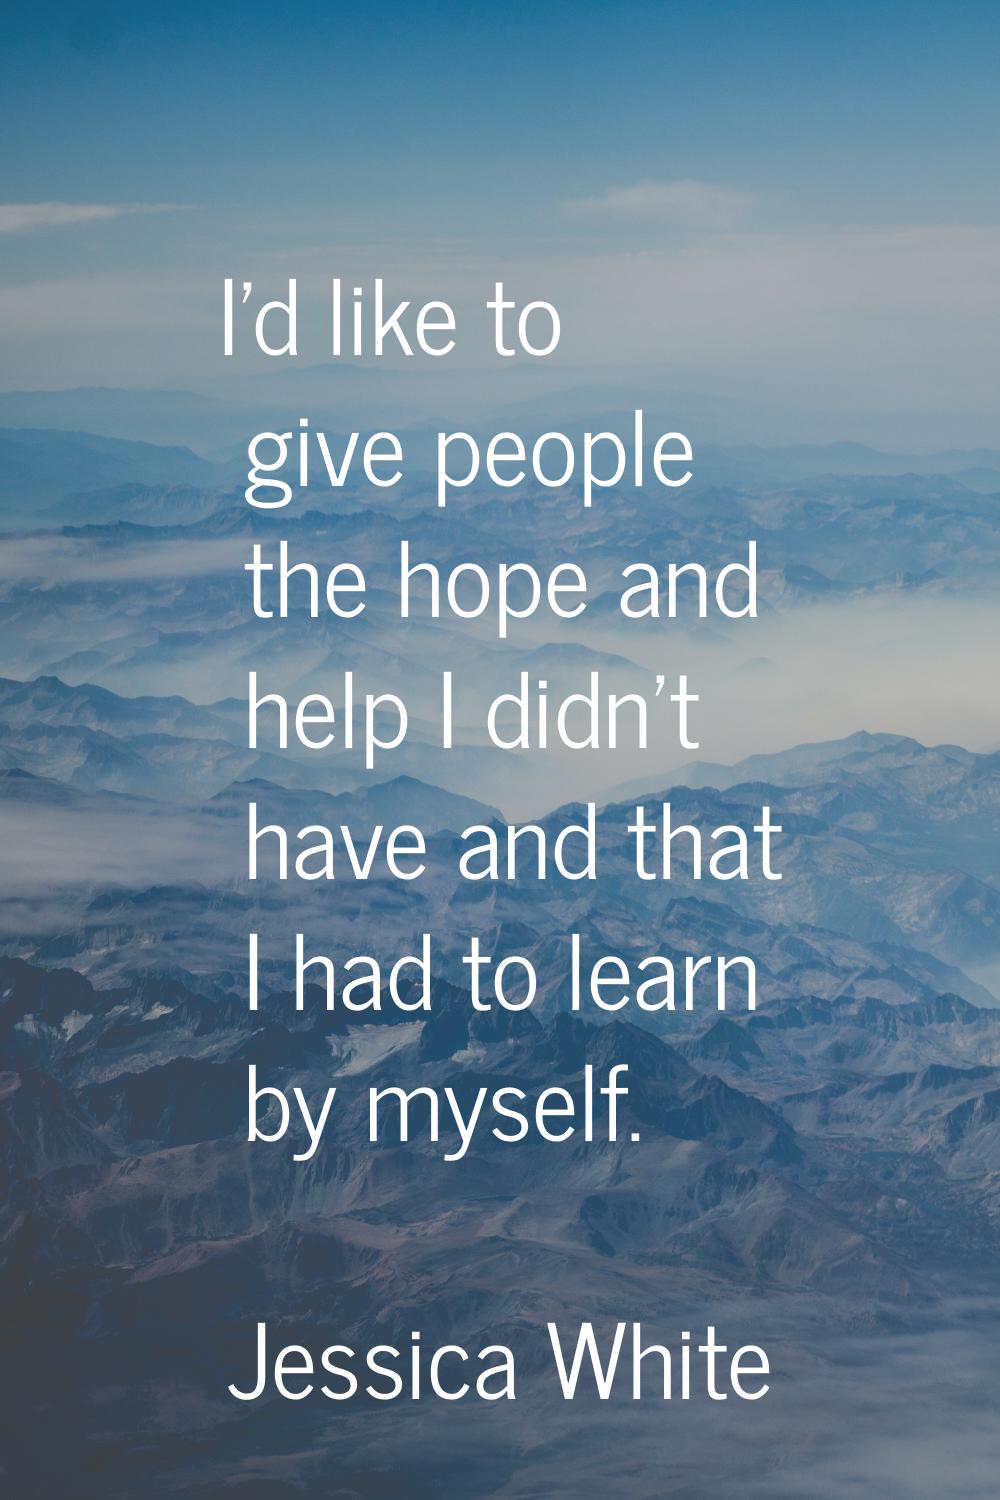 I'd like to give people the hope and help I didn't have and that I had to learn by myself.